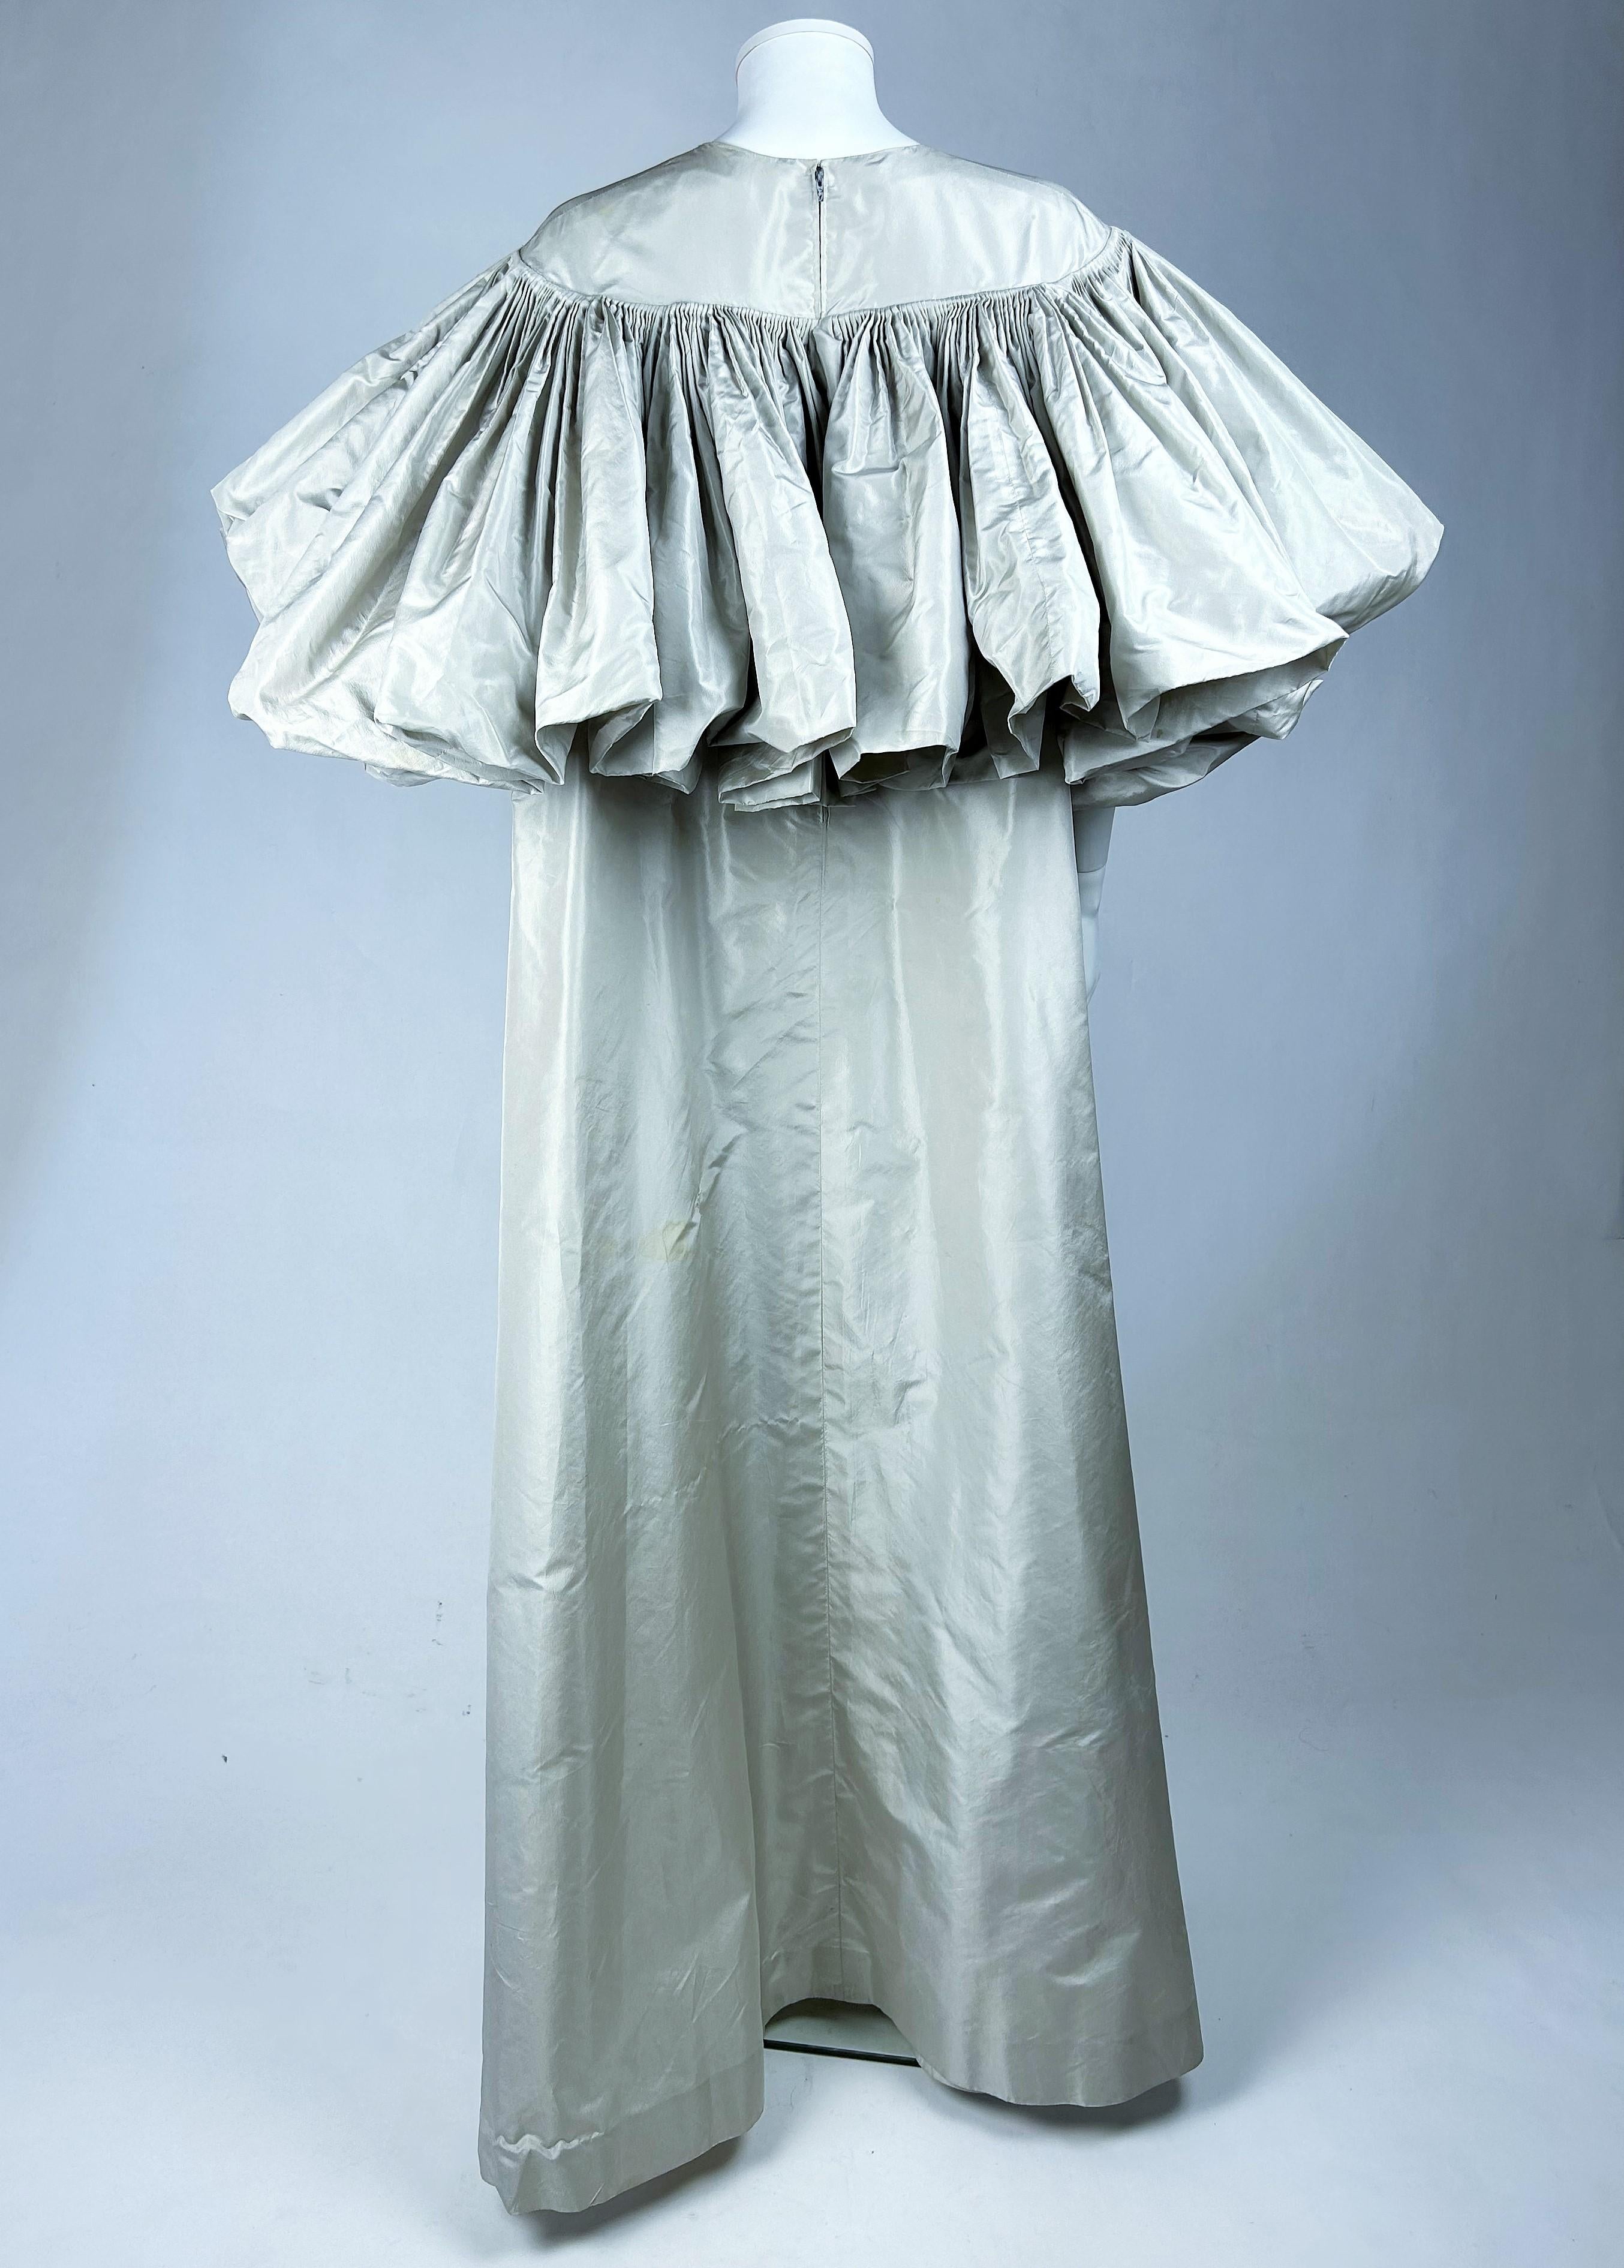 A Taffeta dress by Madame Grès Haute Couture (attributed to) - Paris 1977 7